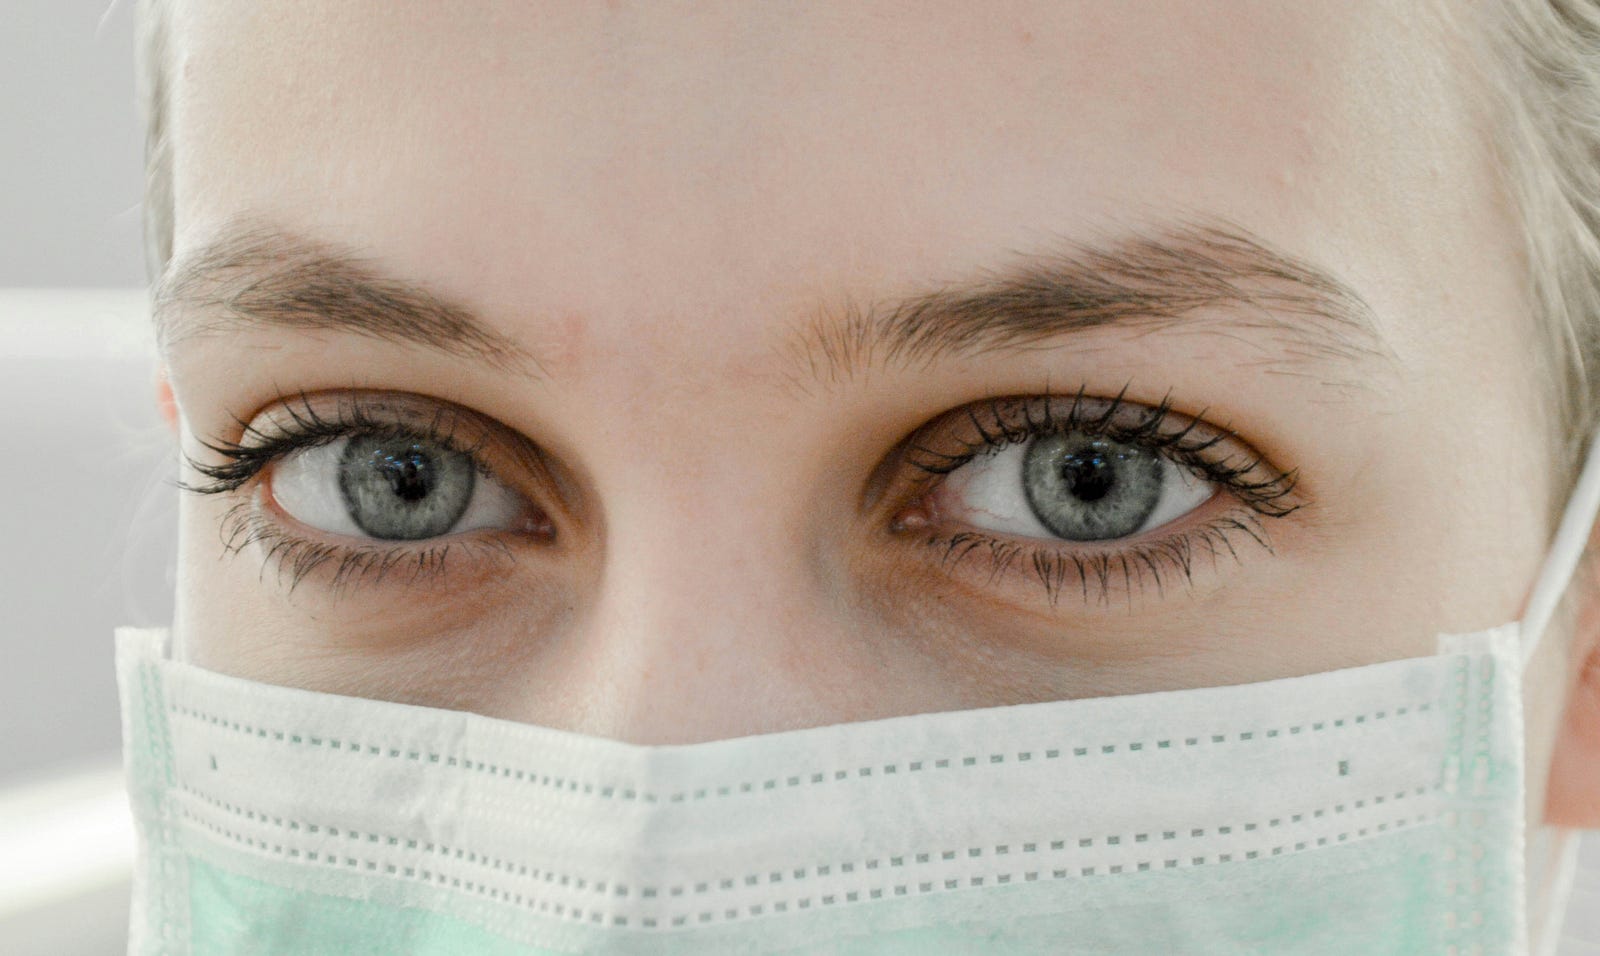 A close-up view of a female health professional staring at us. She dons a paper surgical mask.